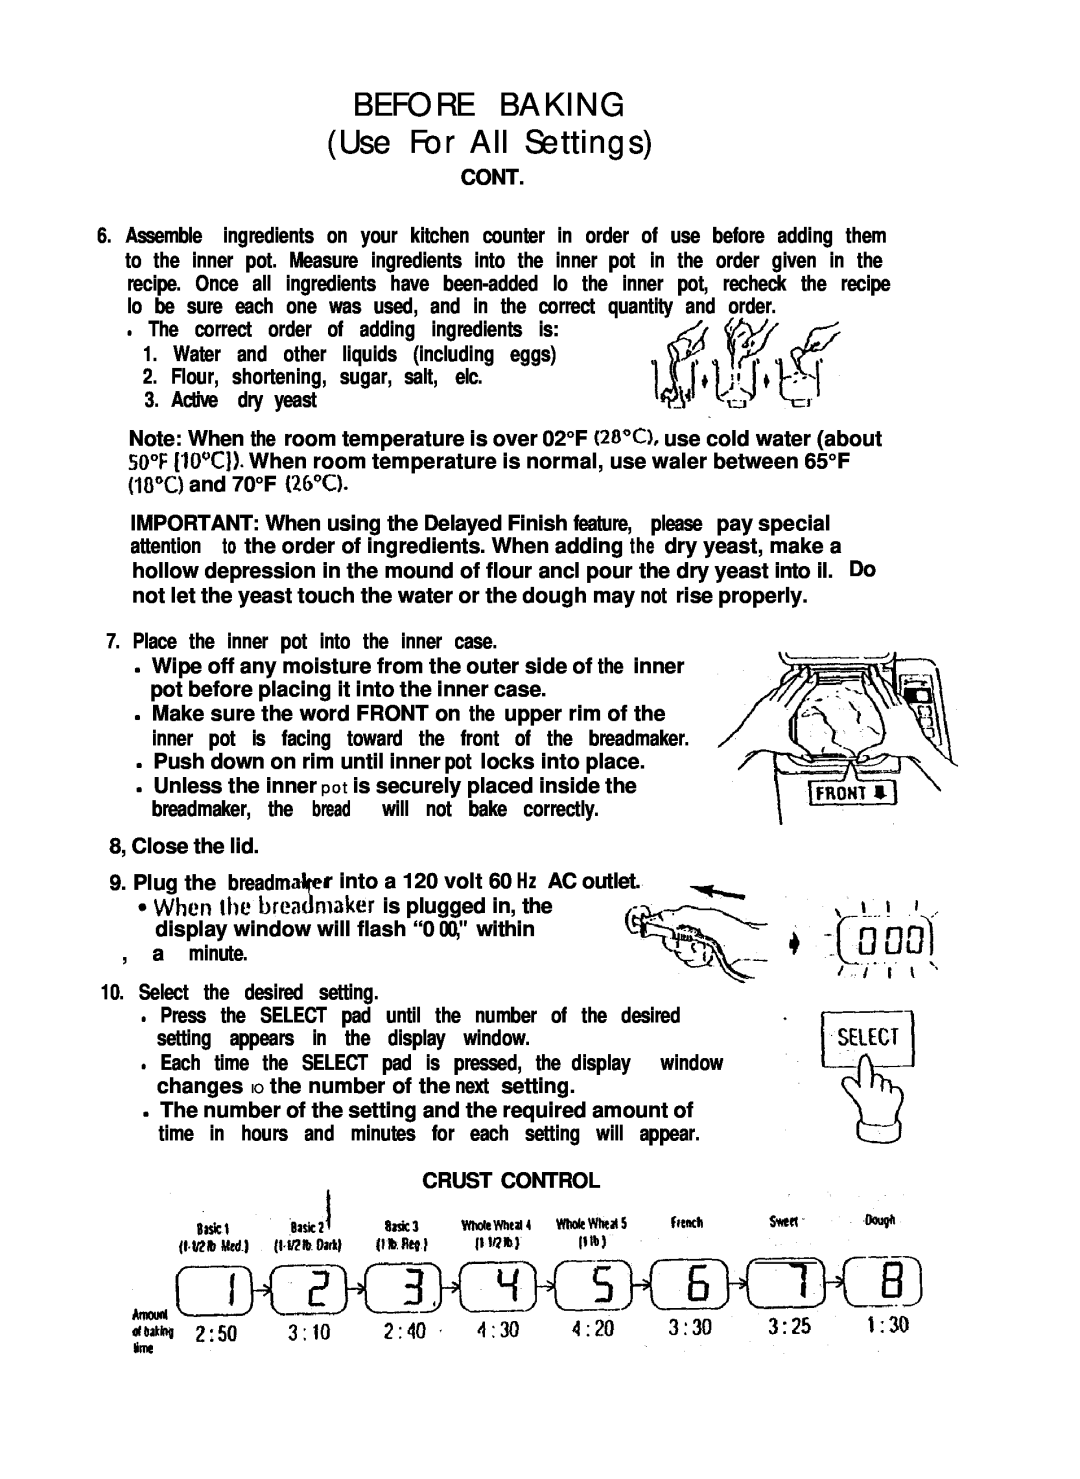 Mr. Coffee BMR 200 instruction manual BEFORE BAKING Use For All Settings 